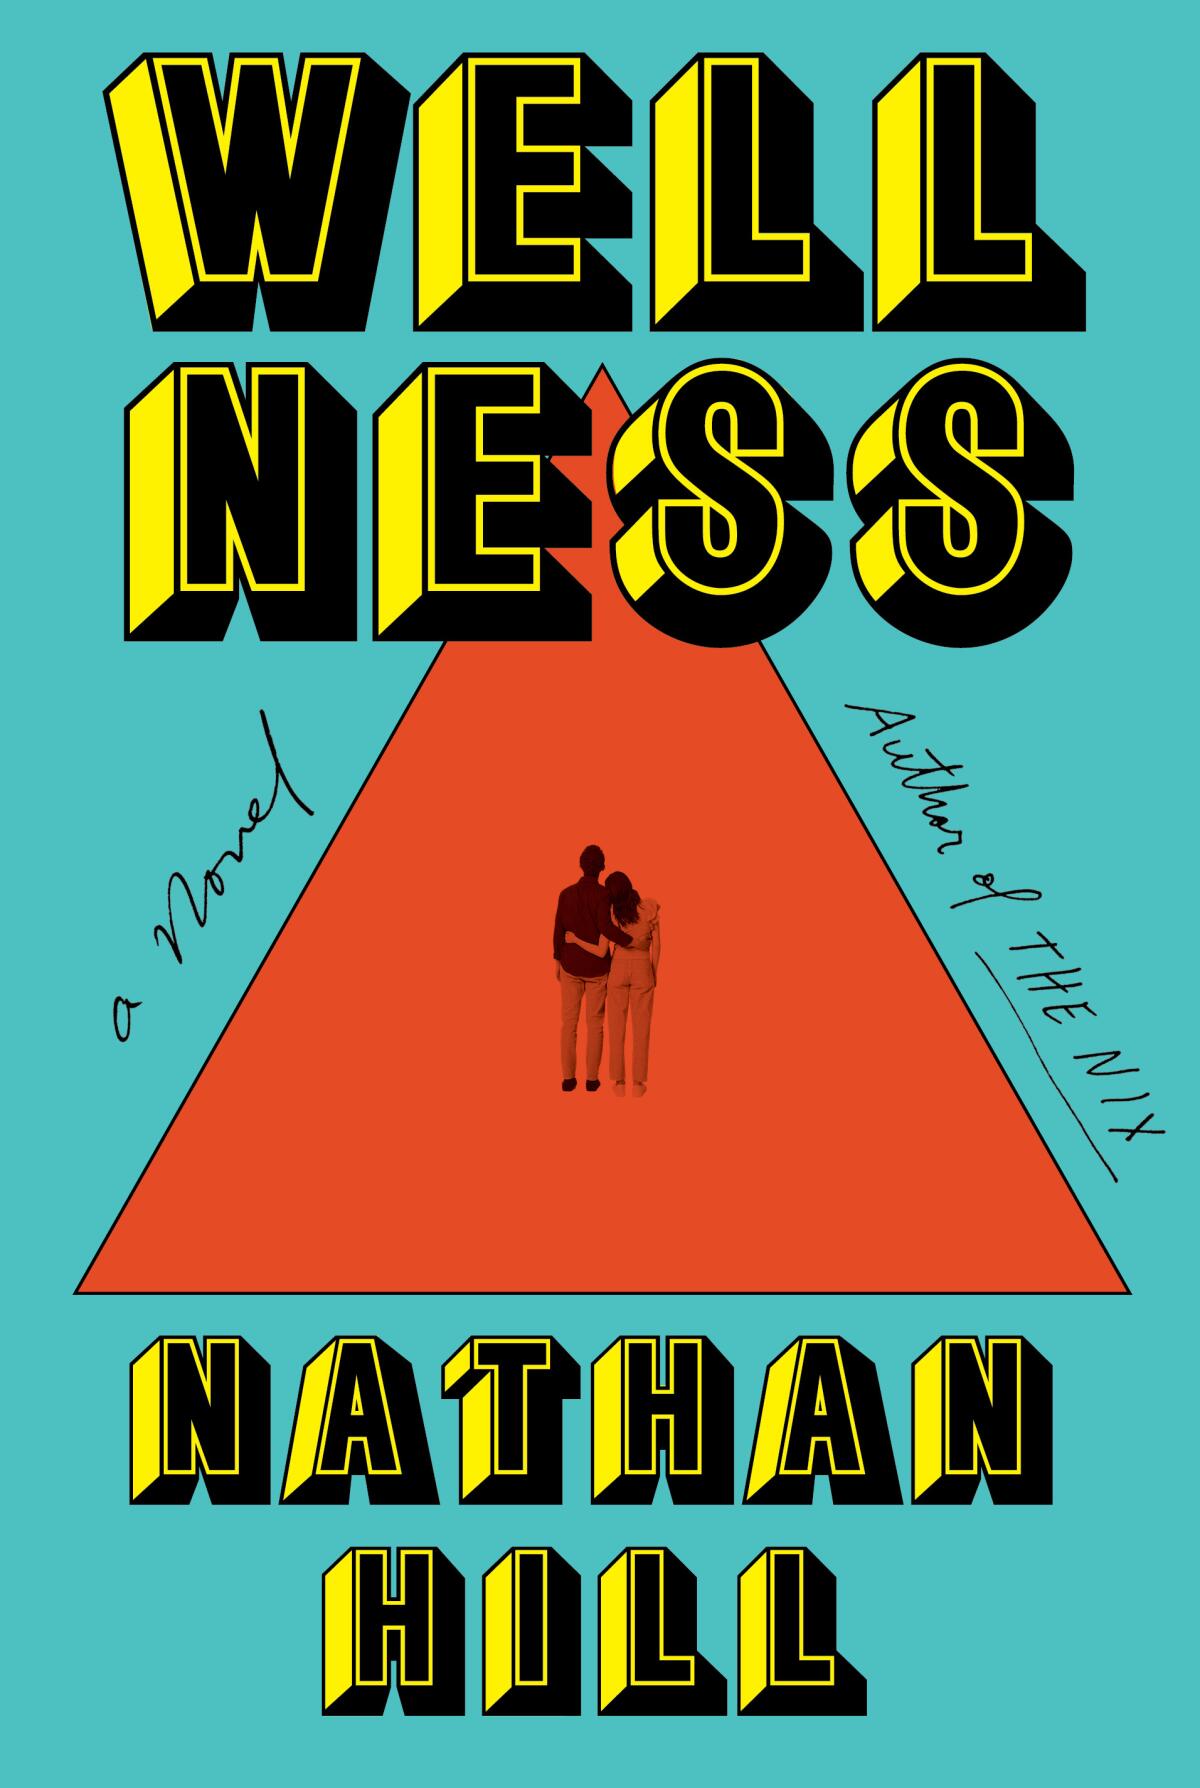 "Wellness," by Nathan Hill